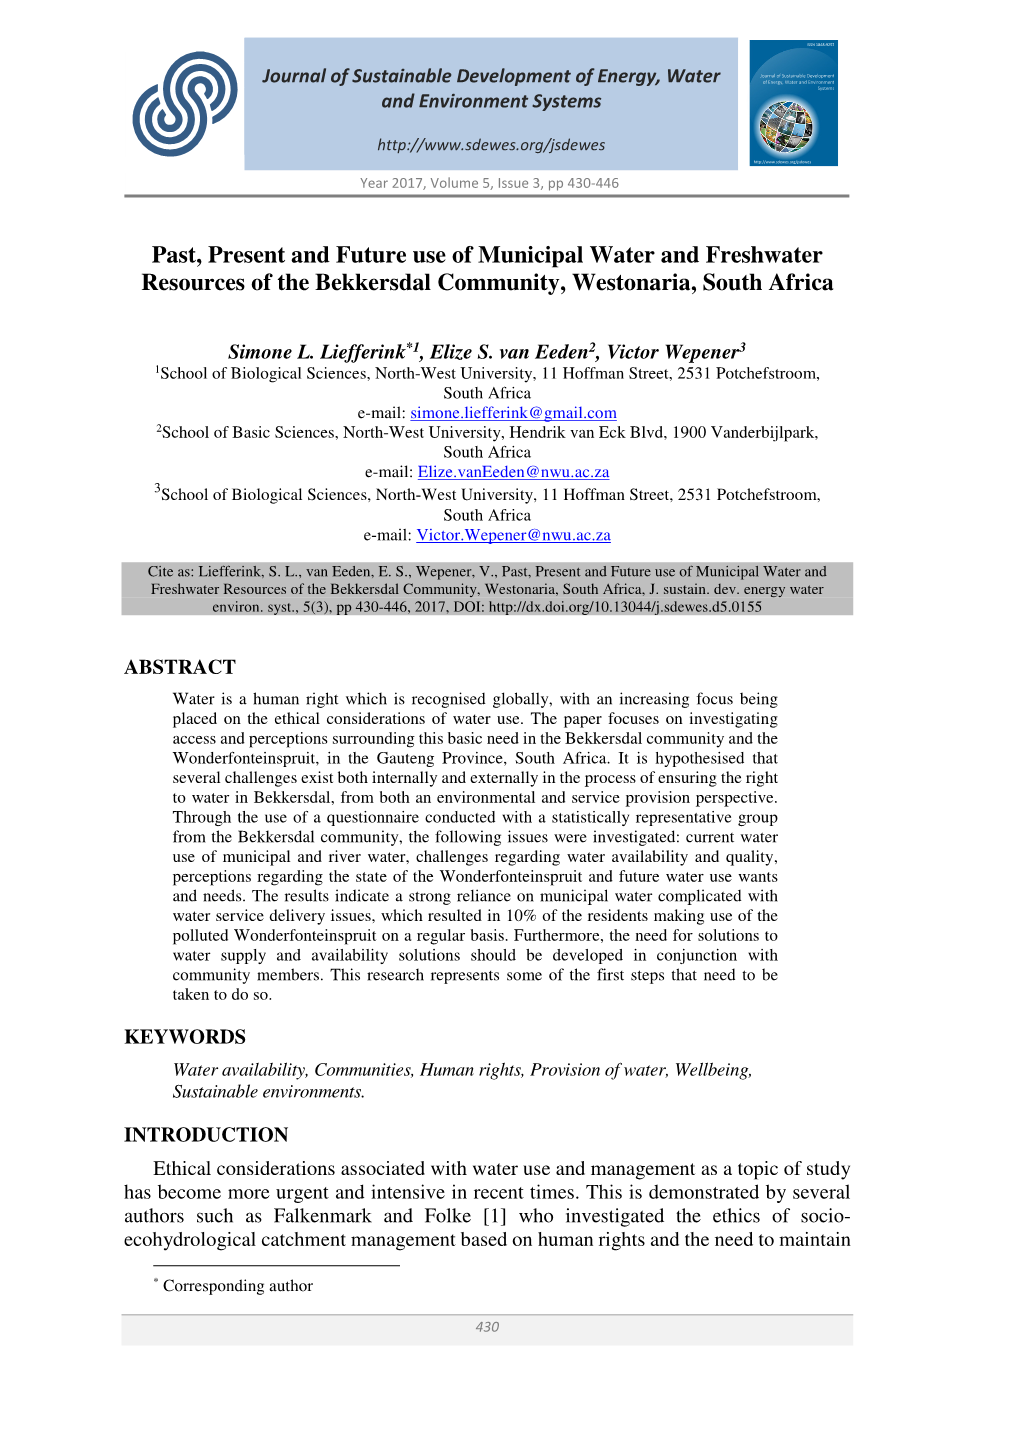 Past, Present and Future Use of Municipal Water and Freshwater Resources of the Bekkersdal Community, Westonaria, South Africa